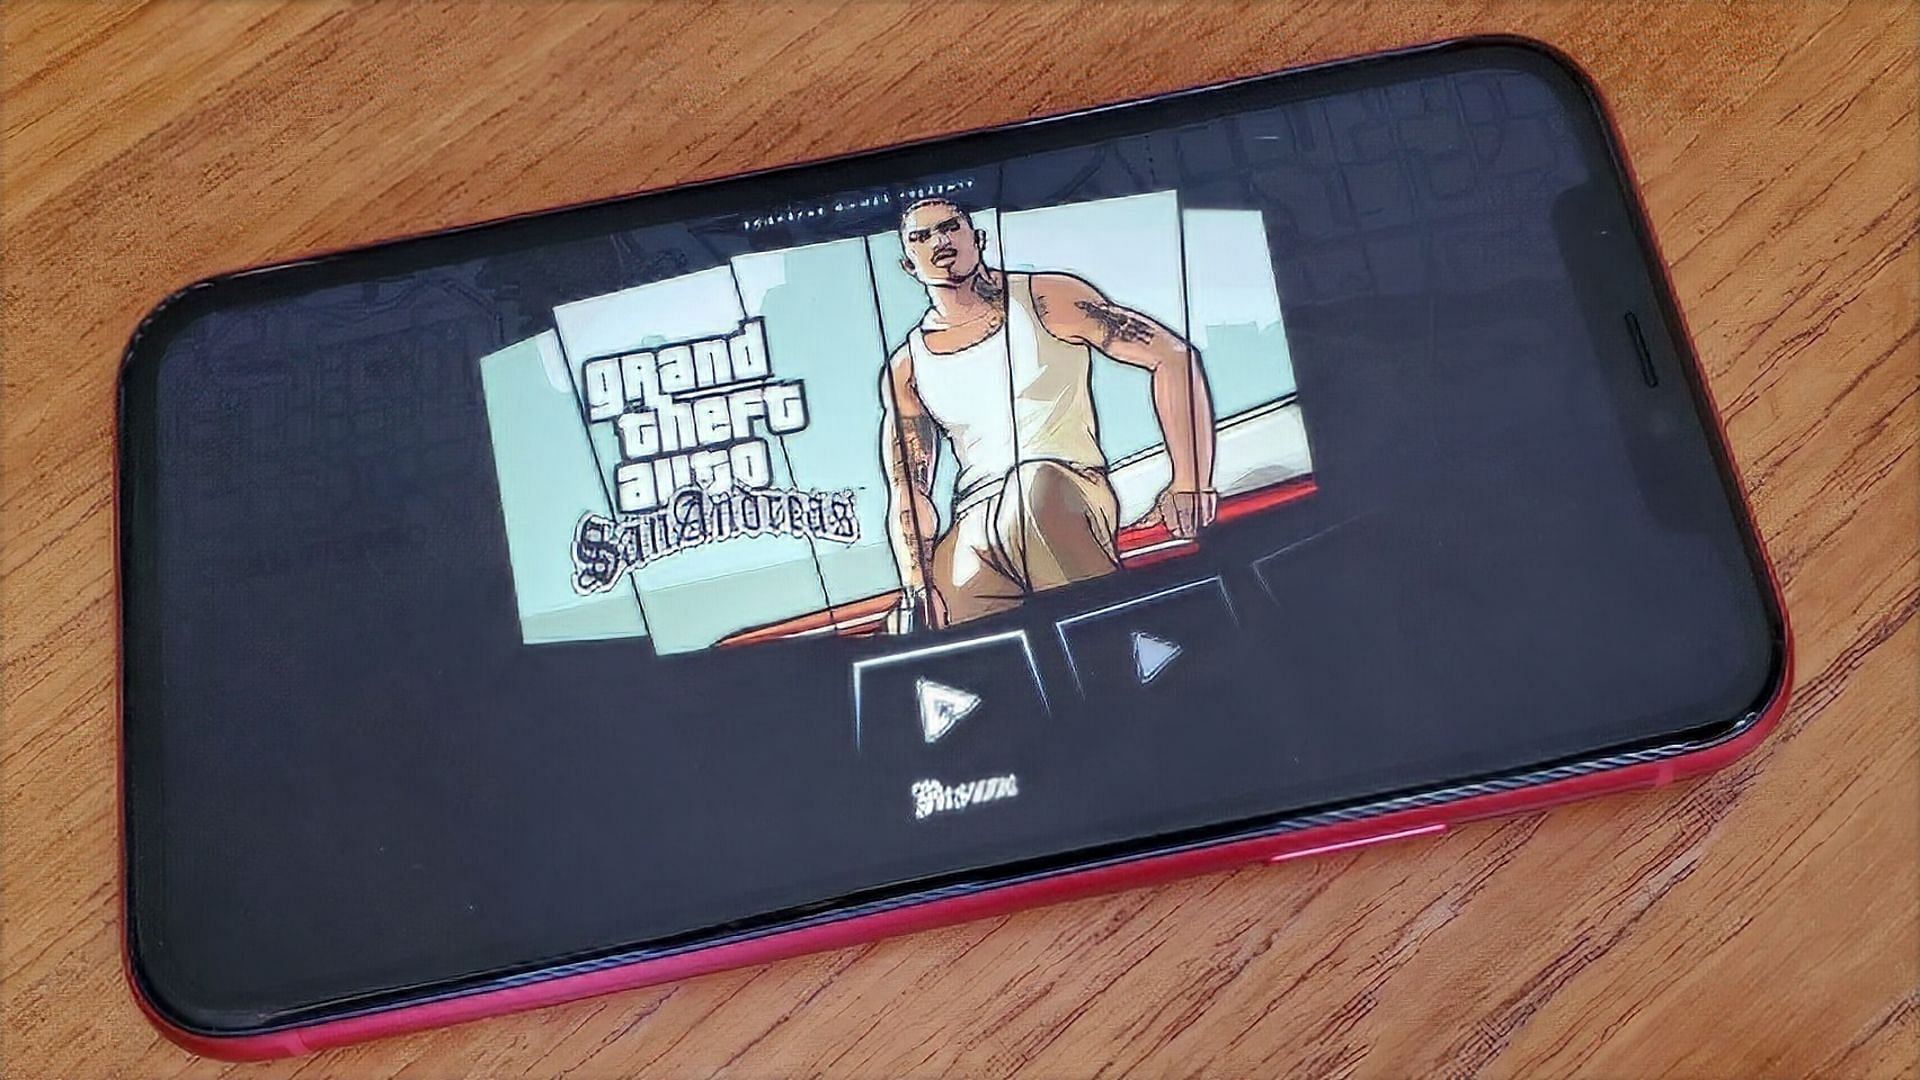 GTA games are popular on mobile devices too. (Image via YouTube/Fliptroniks)